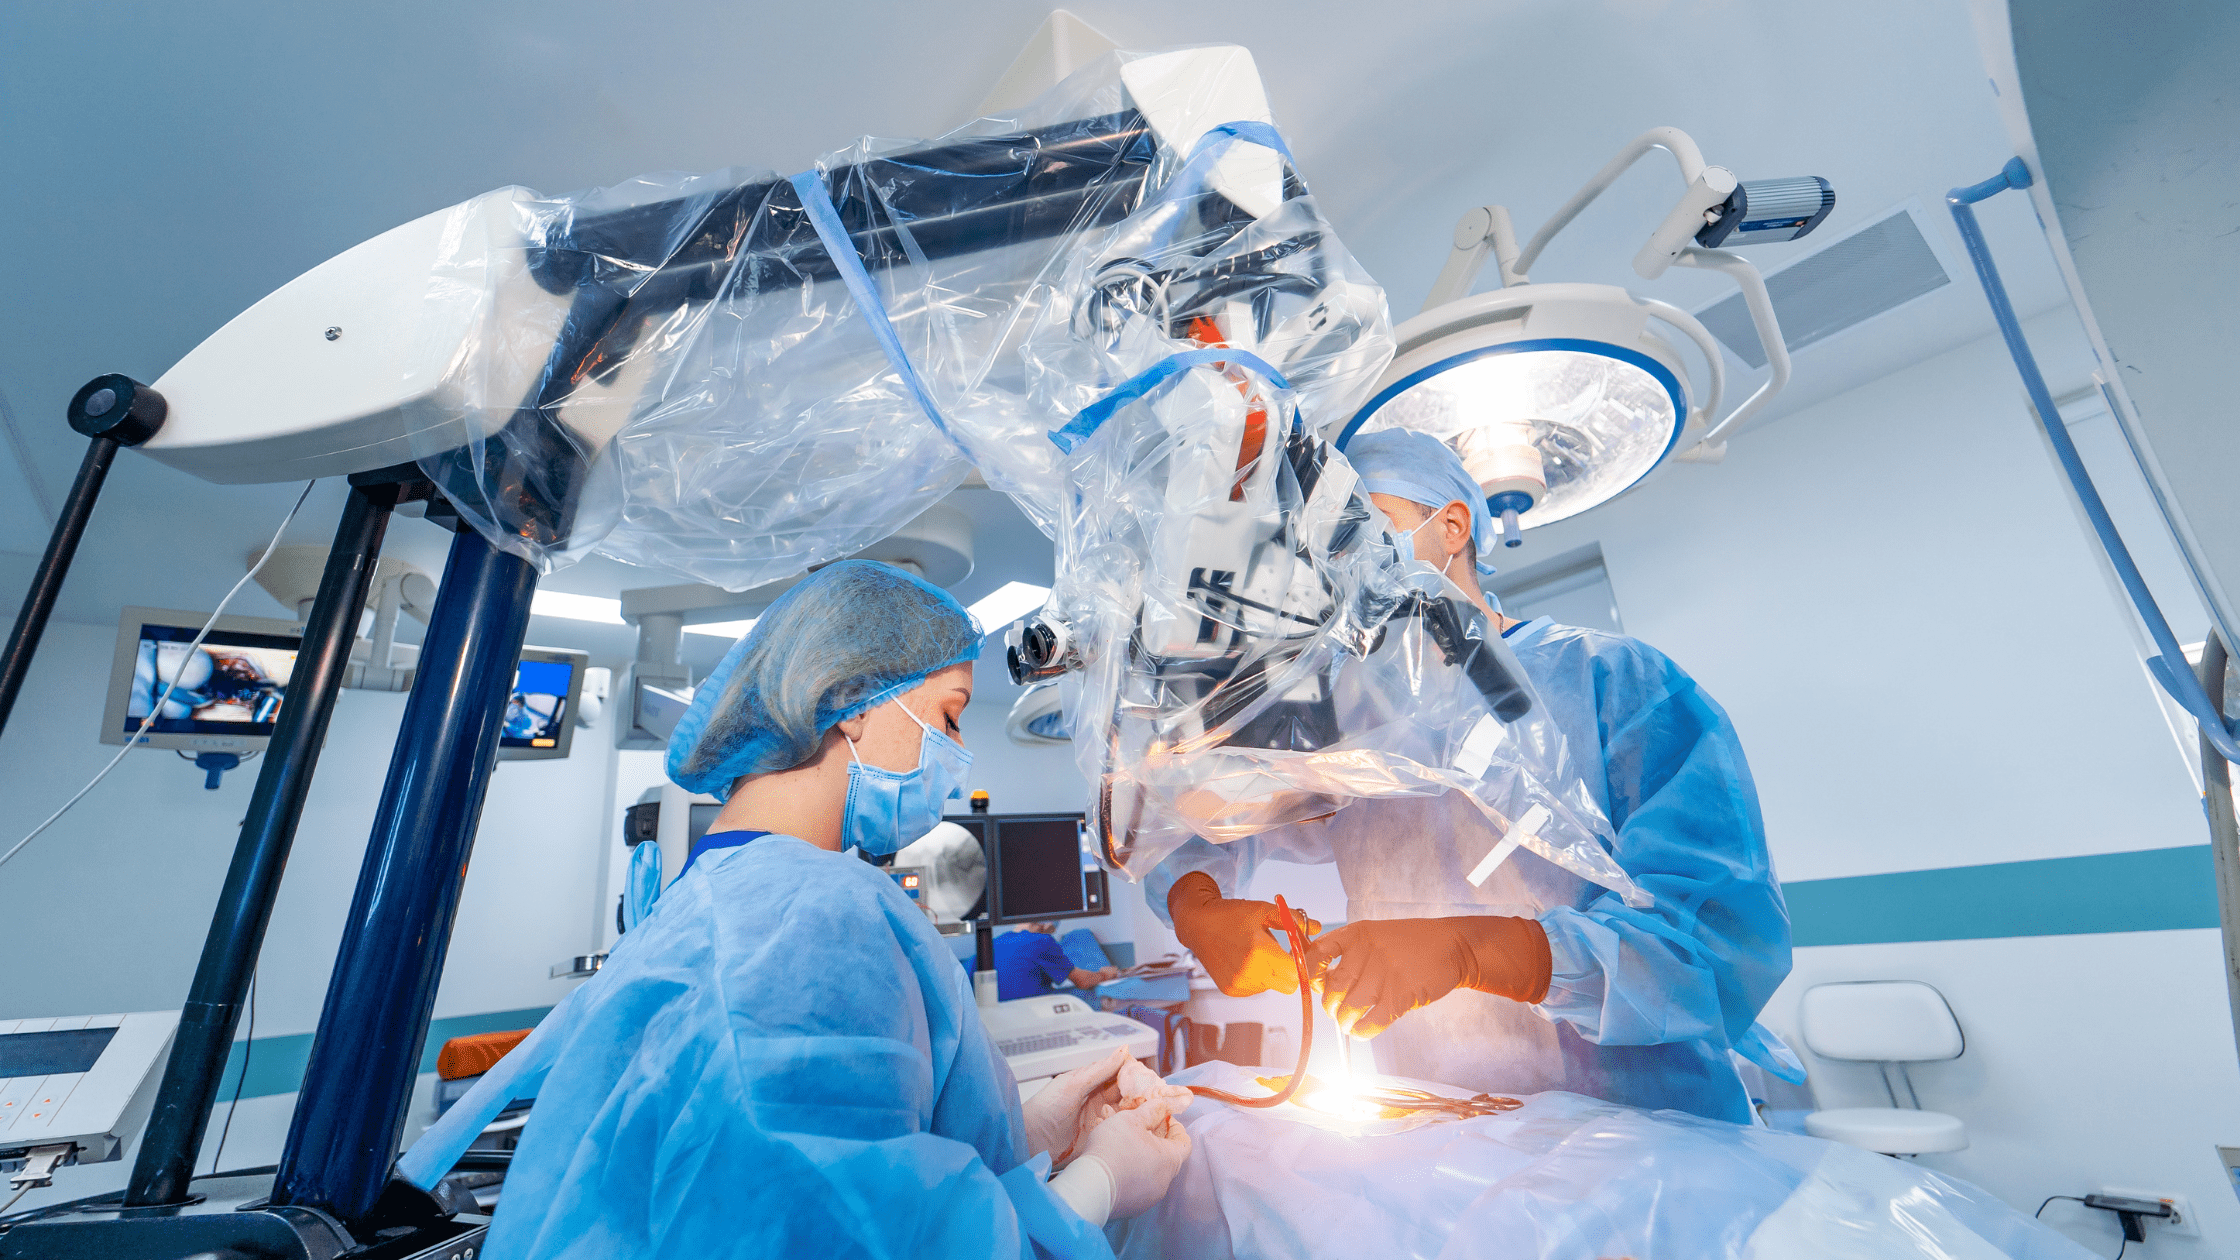 Two surgeons, one female, one male, work under a surgical robot.